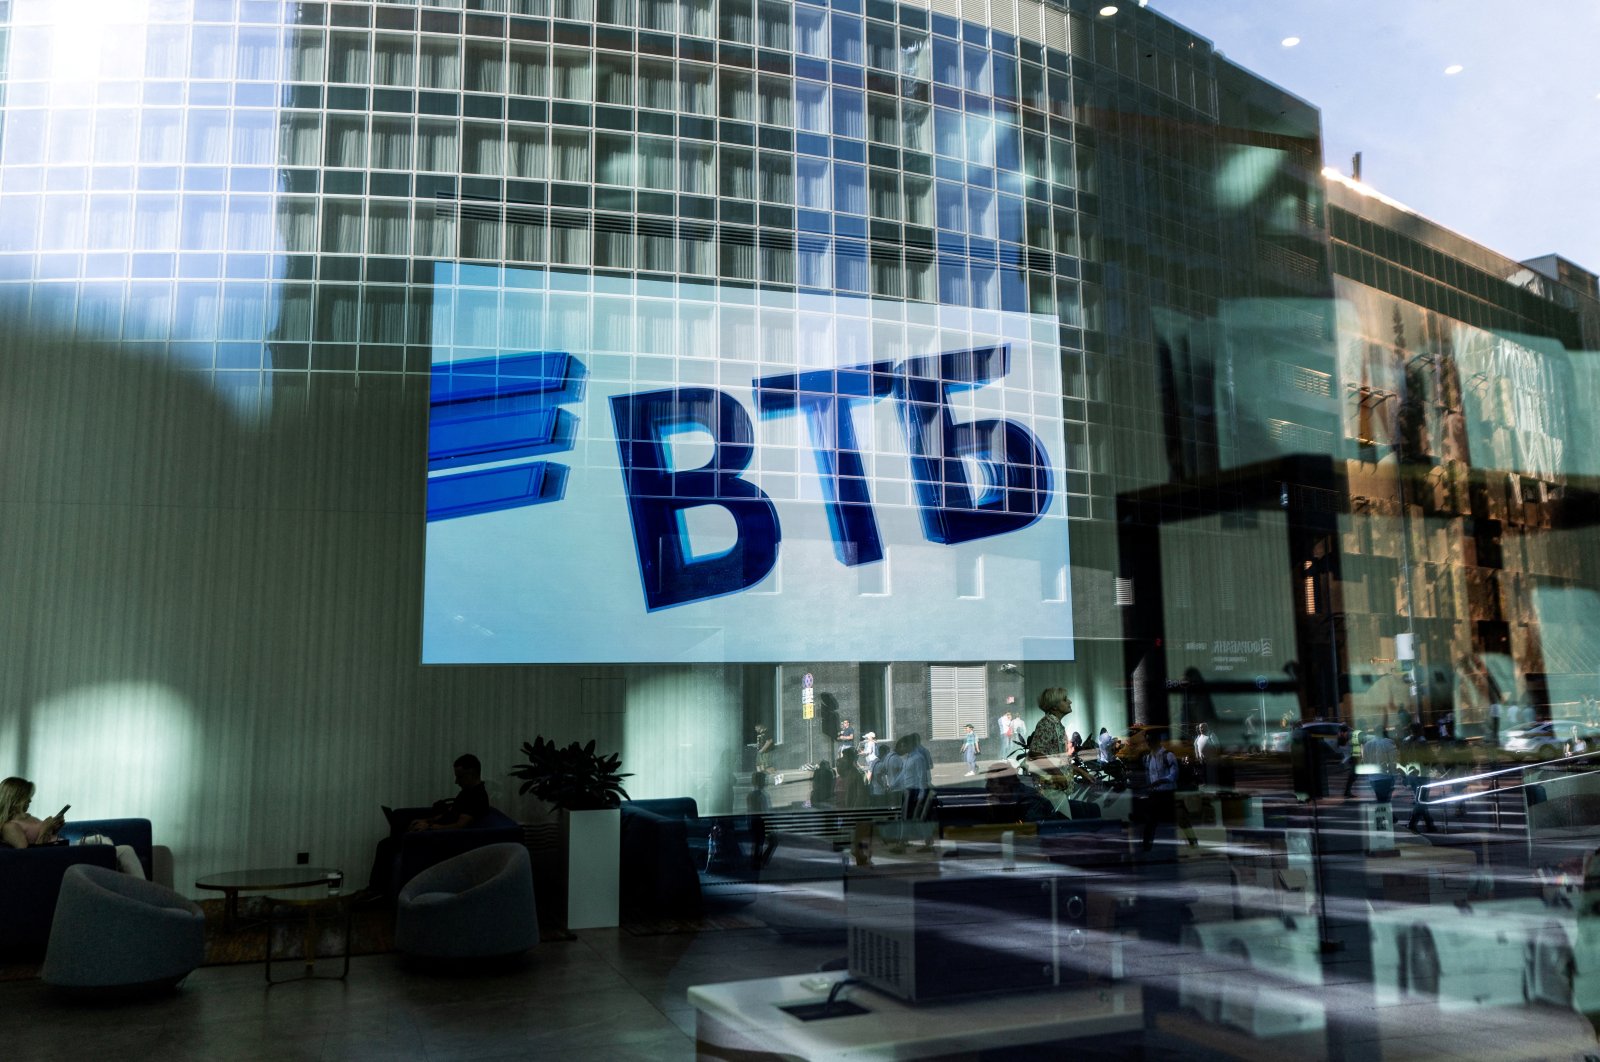 A VTB bank logo is seen on screen through a window in the Moscow International Business Center, also known as Moscow-City, on a sunny day in Moscow, Russia, Aug. 12, 2022. (Reuters Photo)